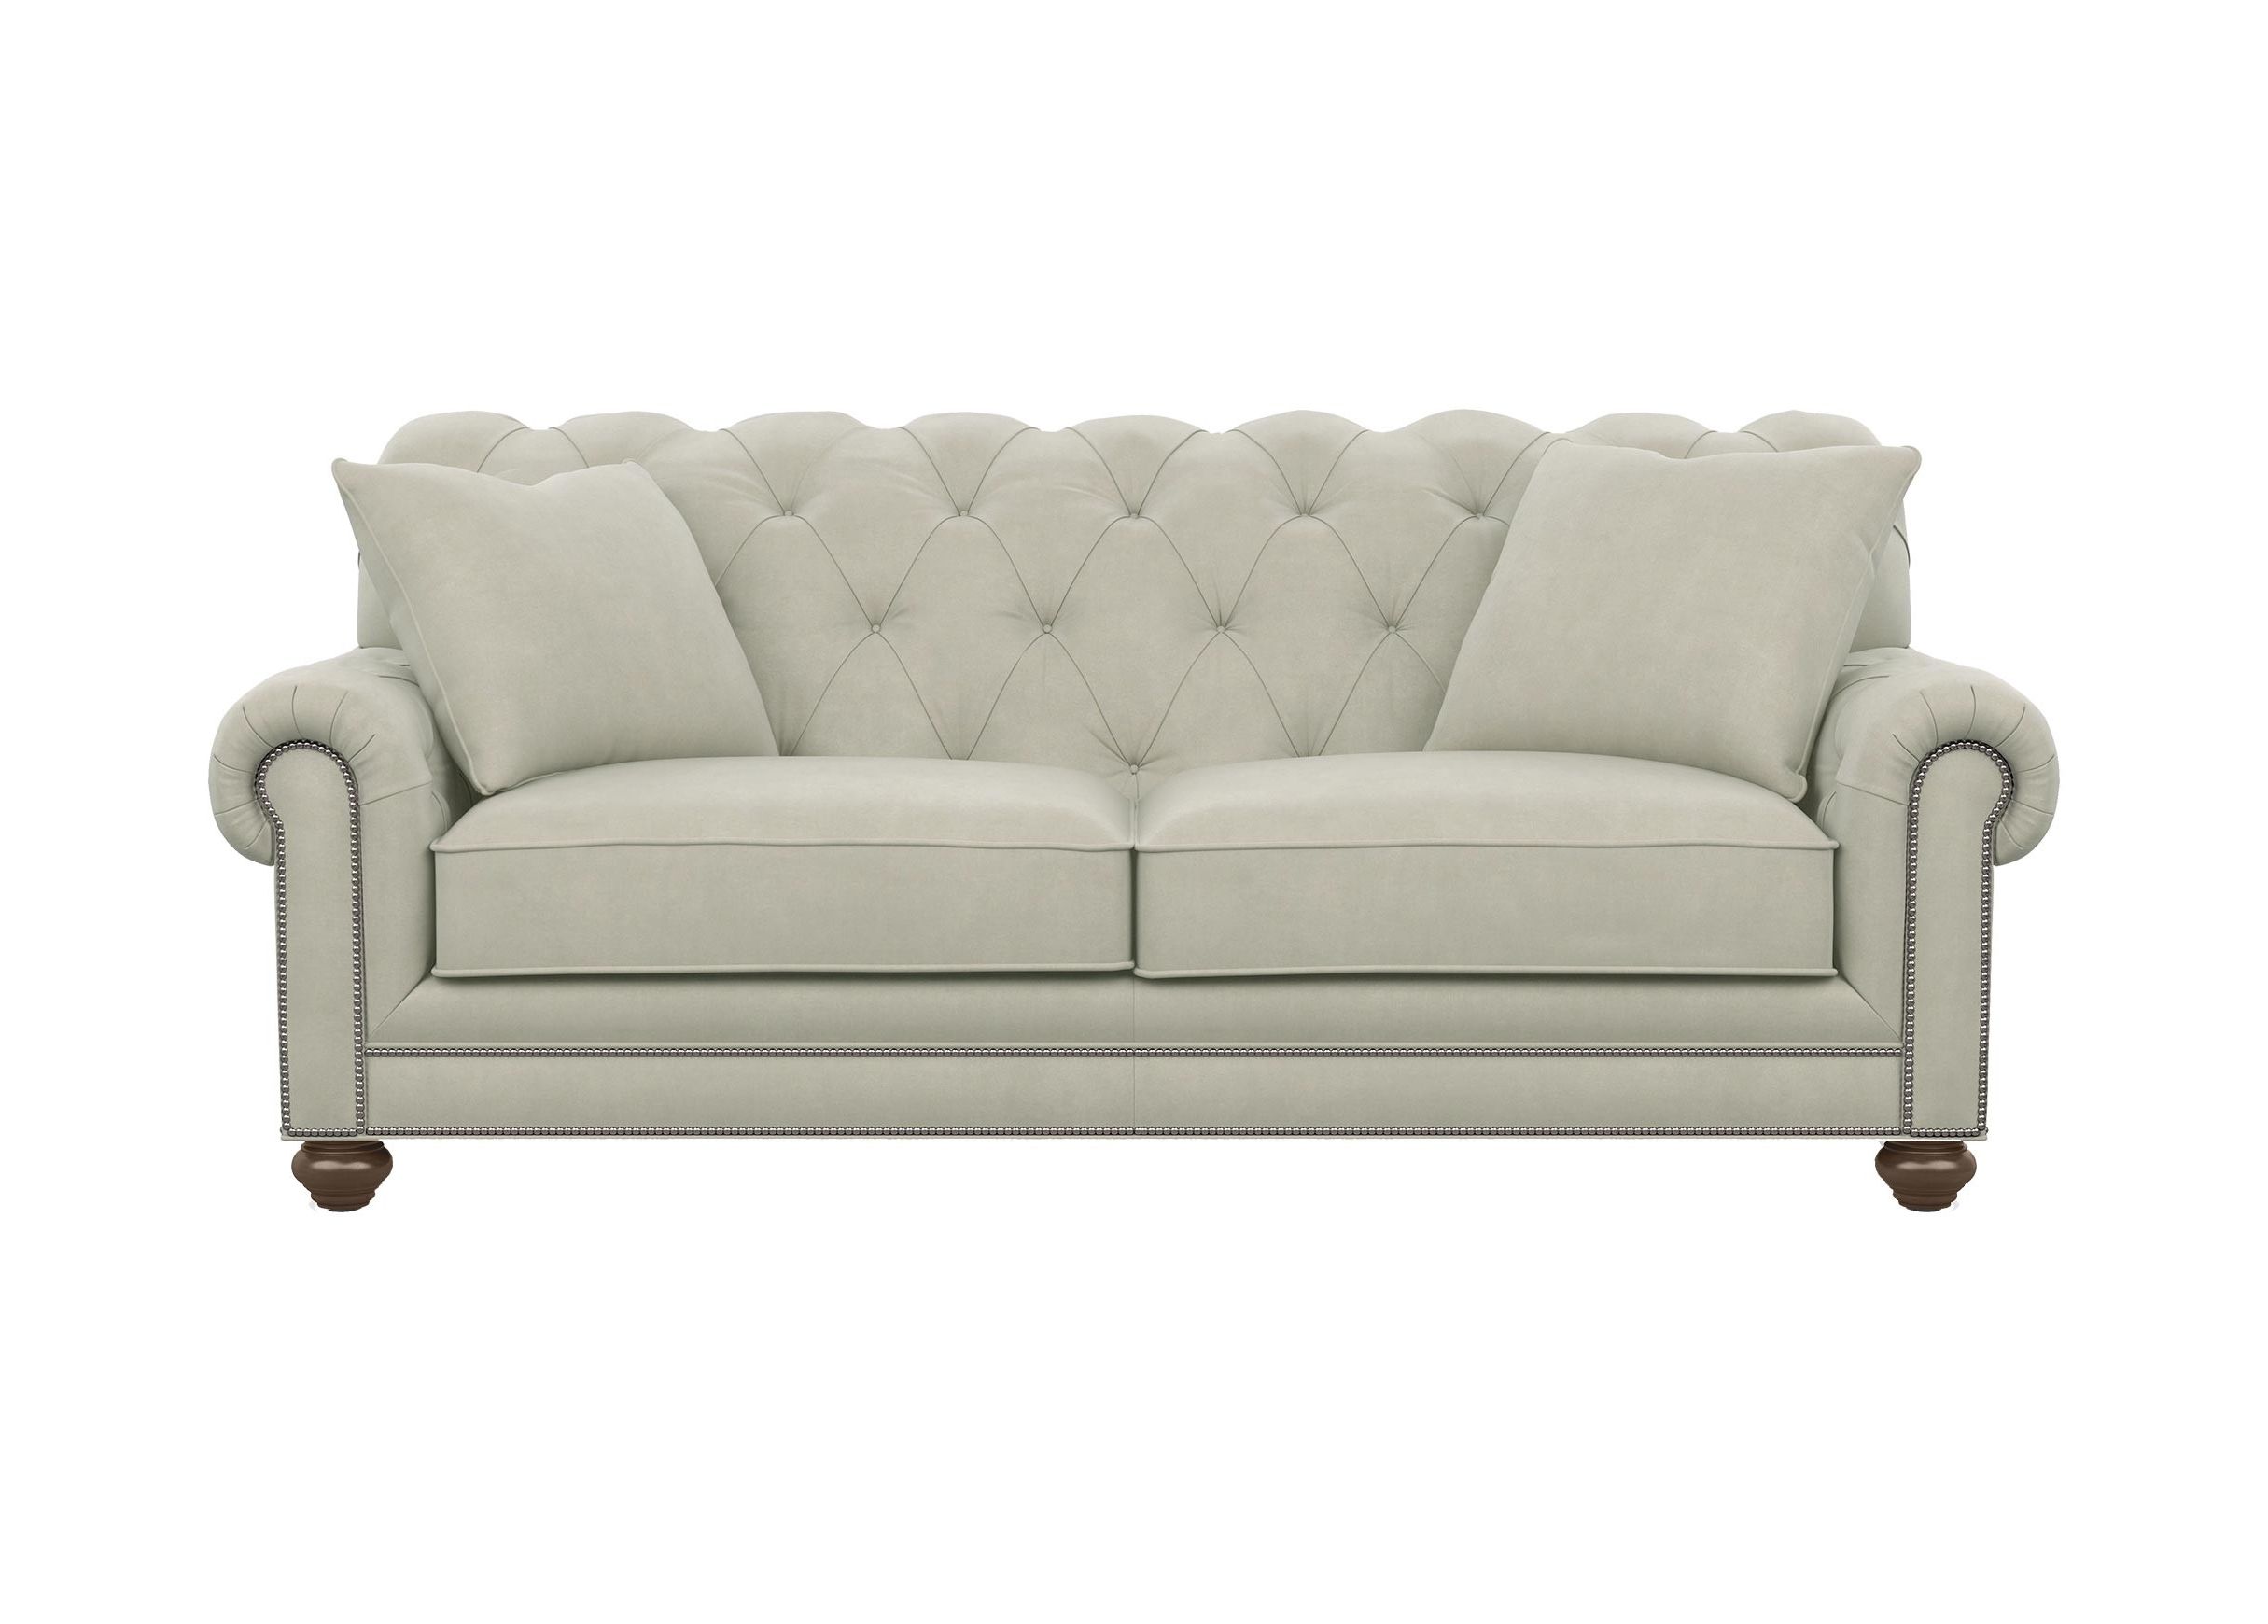 2017 Furniture : Ethan Allen Down Filled Sofa Beautiful Sectional Sofas With Duluth Mn Sectional Sofas (View 6 of 15)